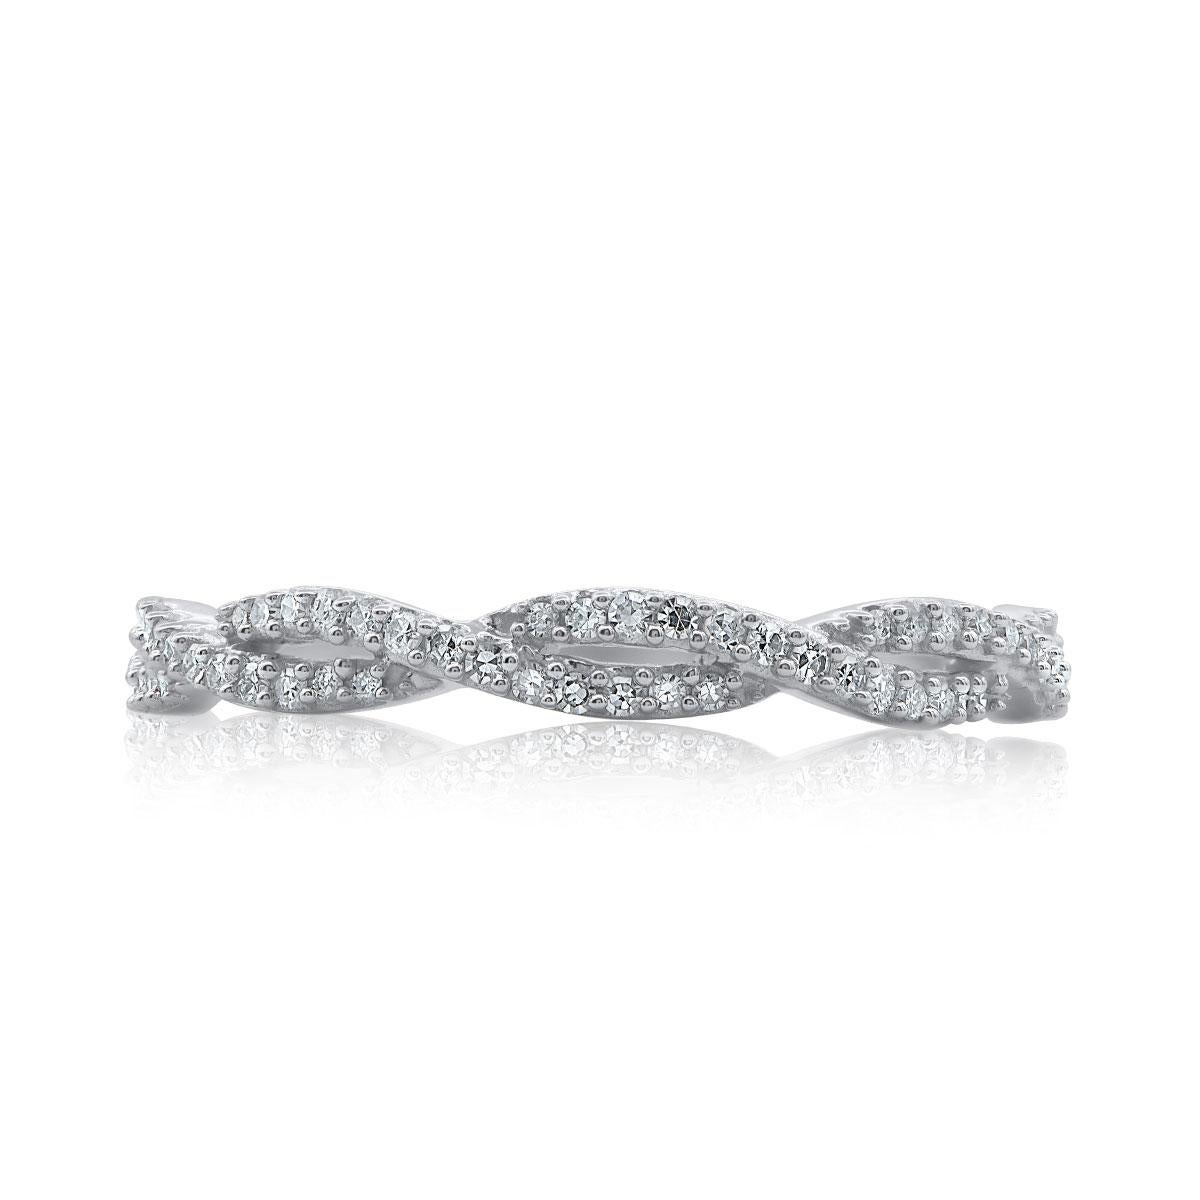 Modern TJD 0.33 Carat Round Diamond Twisted Eternity Band Ring in 14 Karat White Gold For Sale